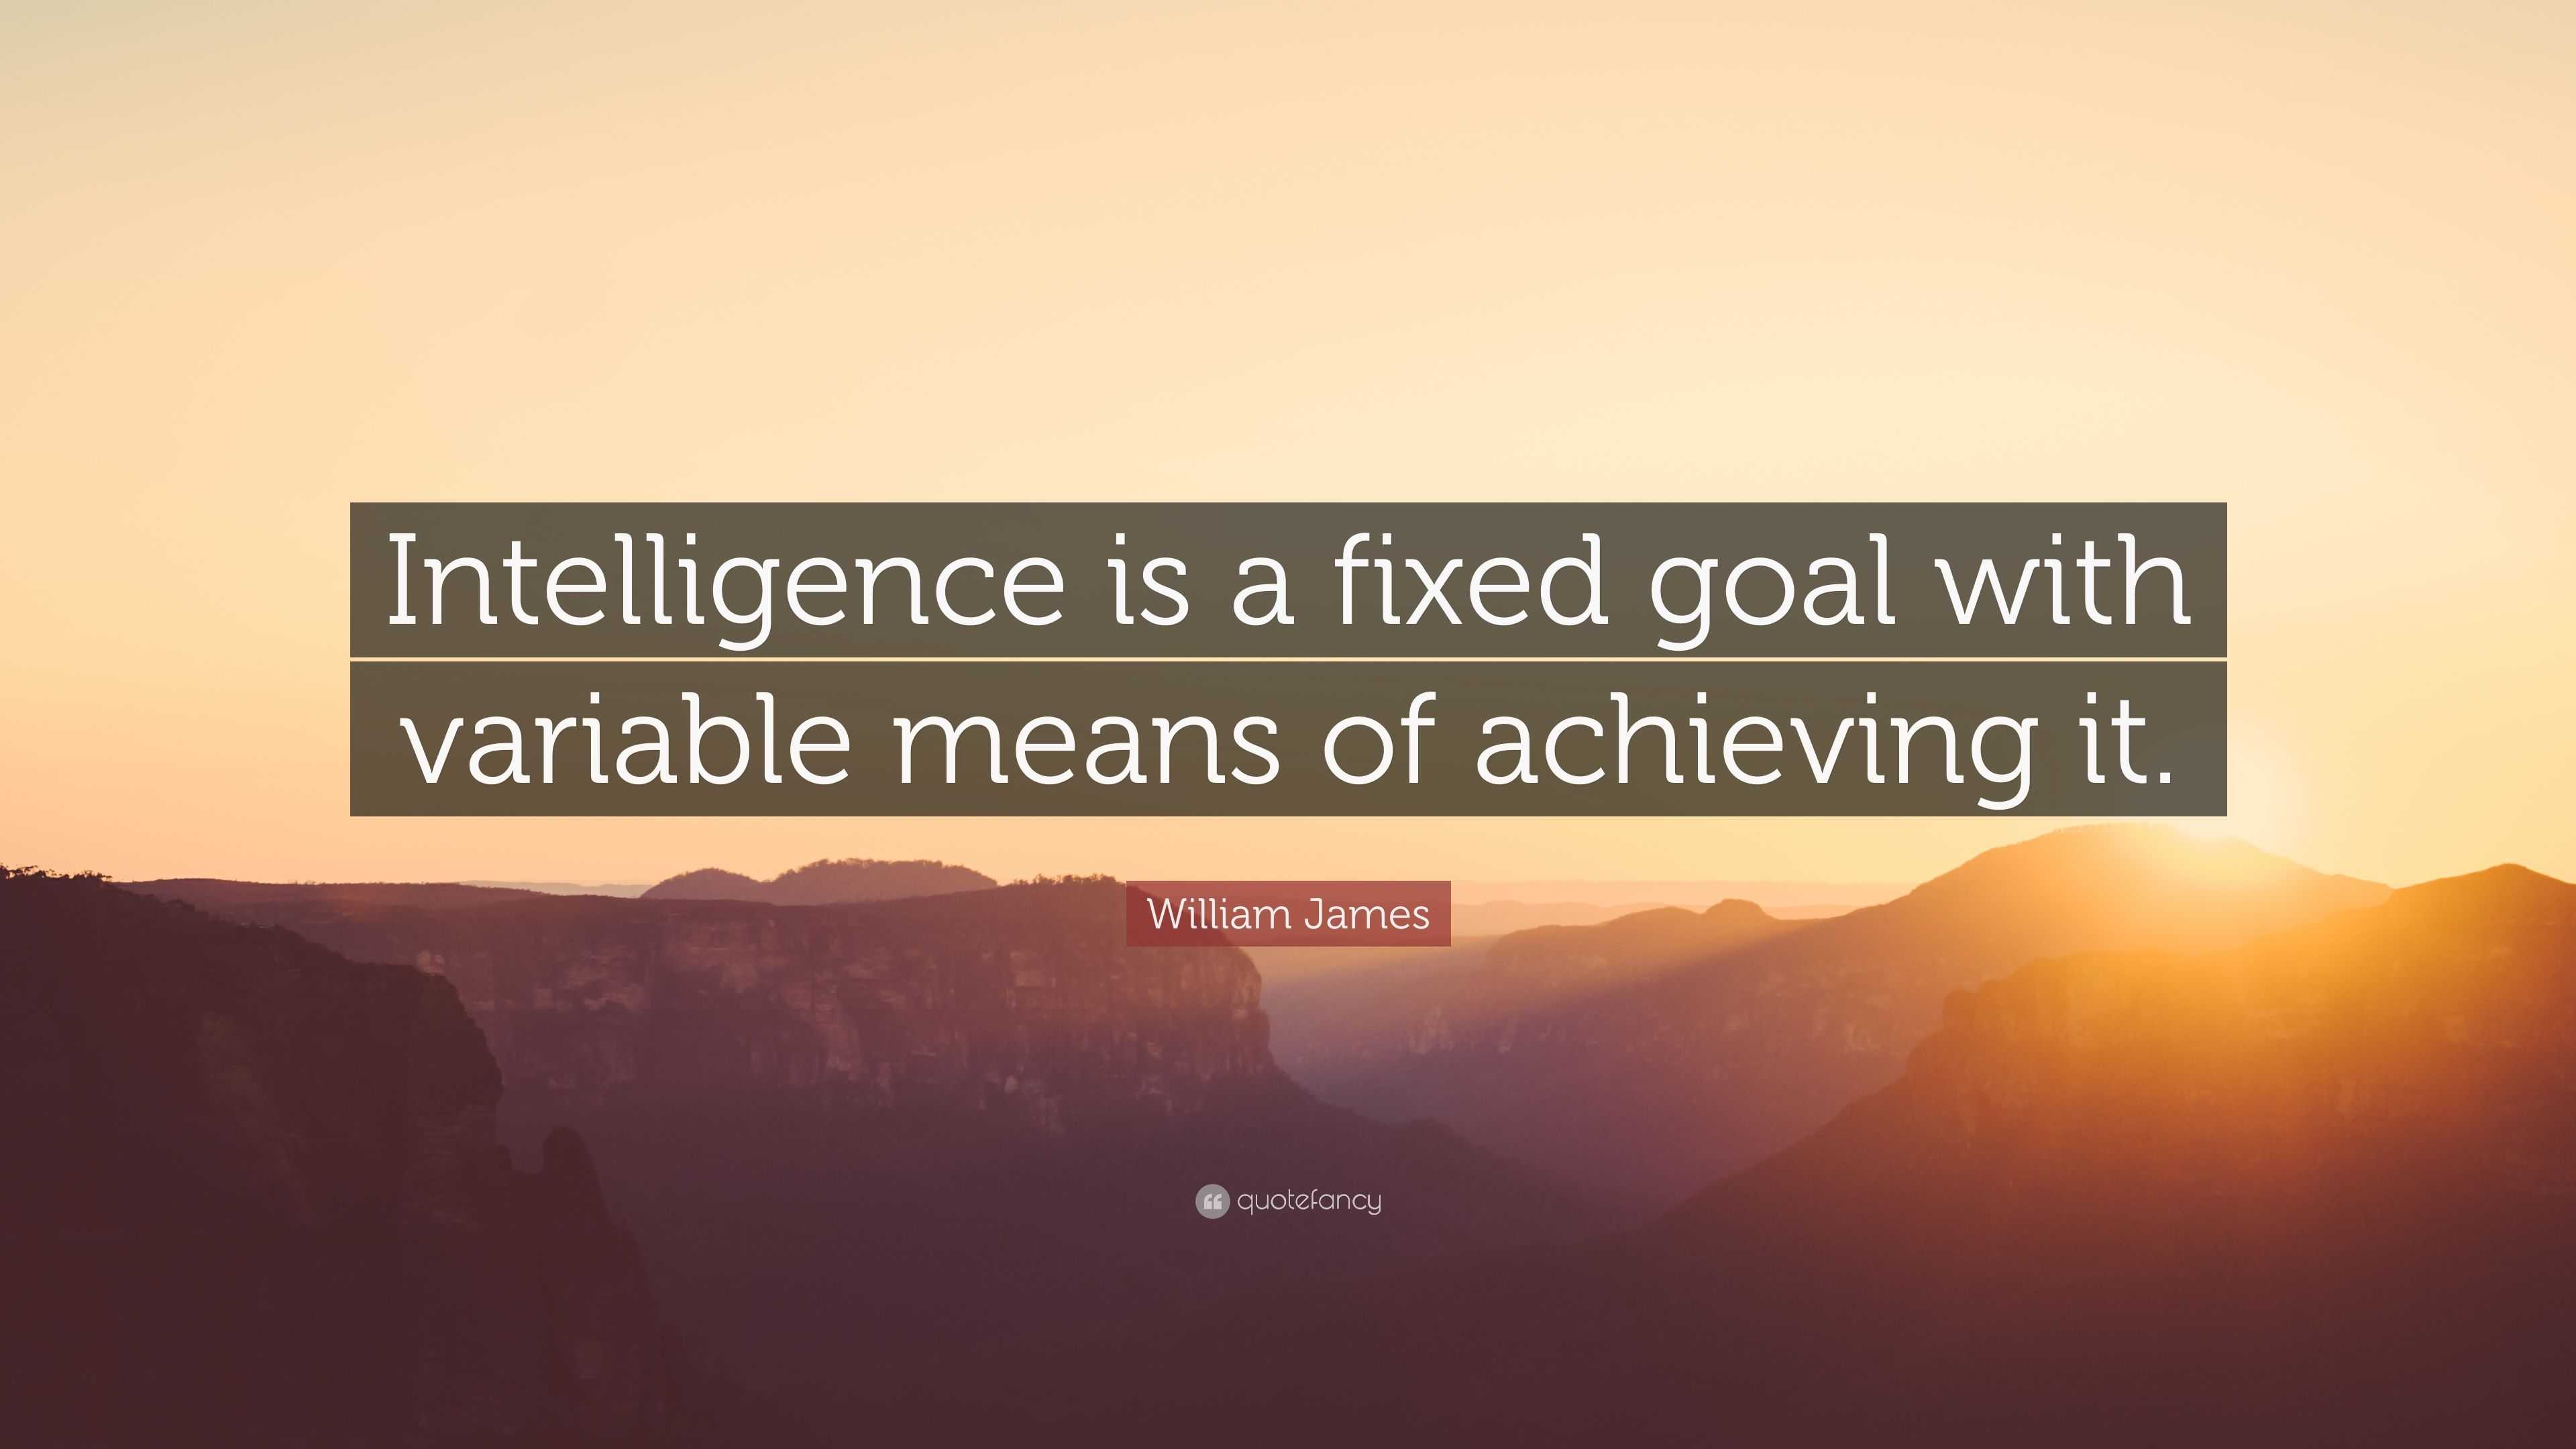 William James Quote: “Intelligence is a fixed goal with variable means ...